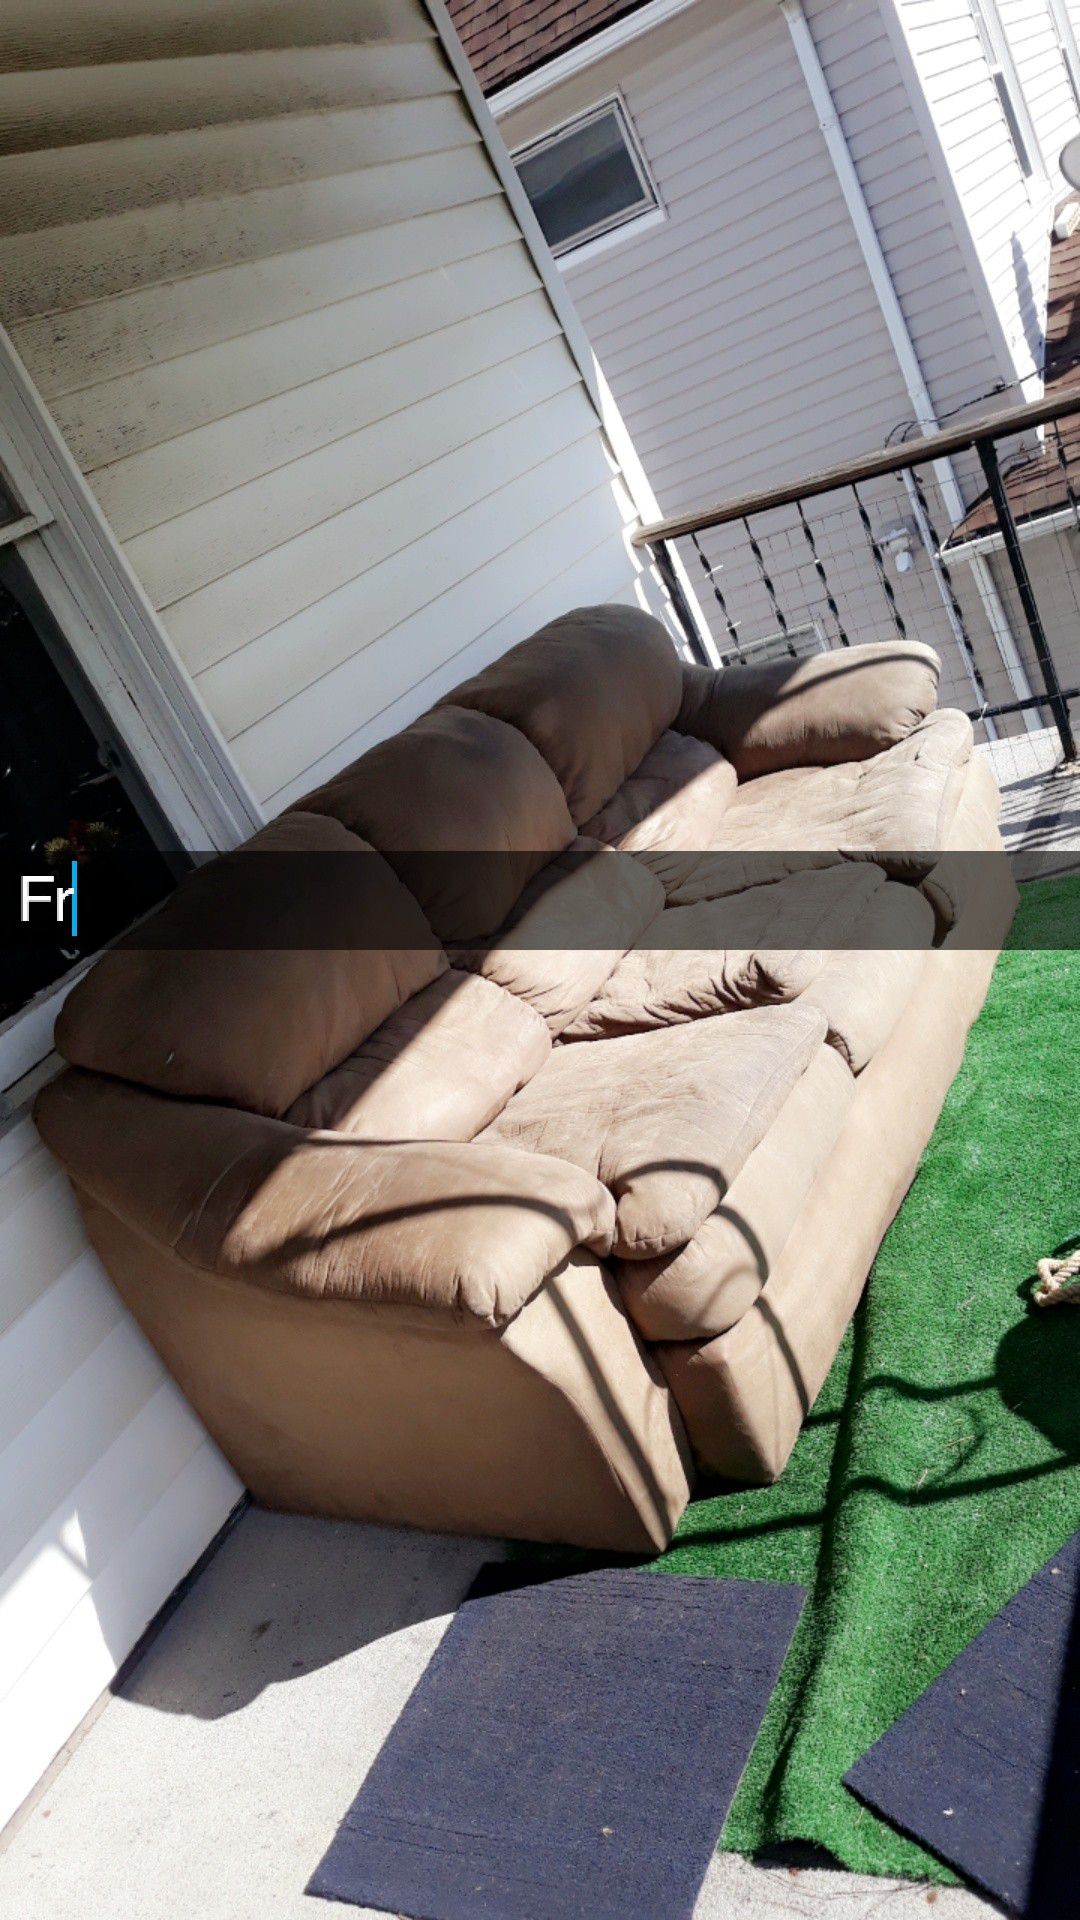 Free couch!!